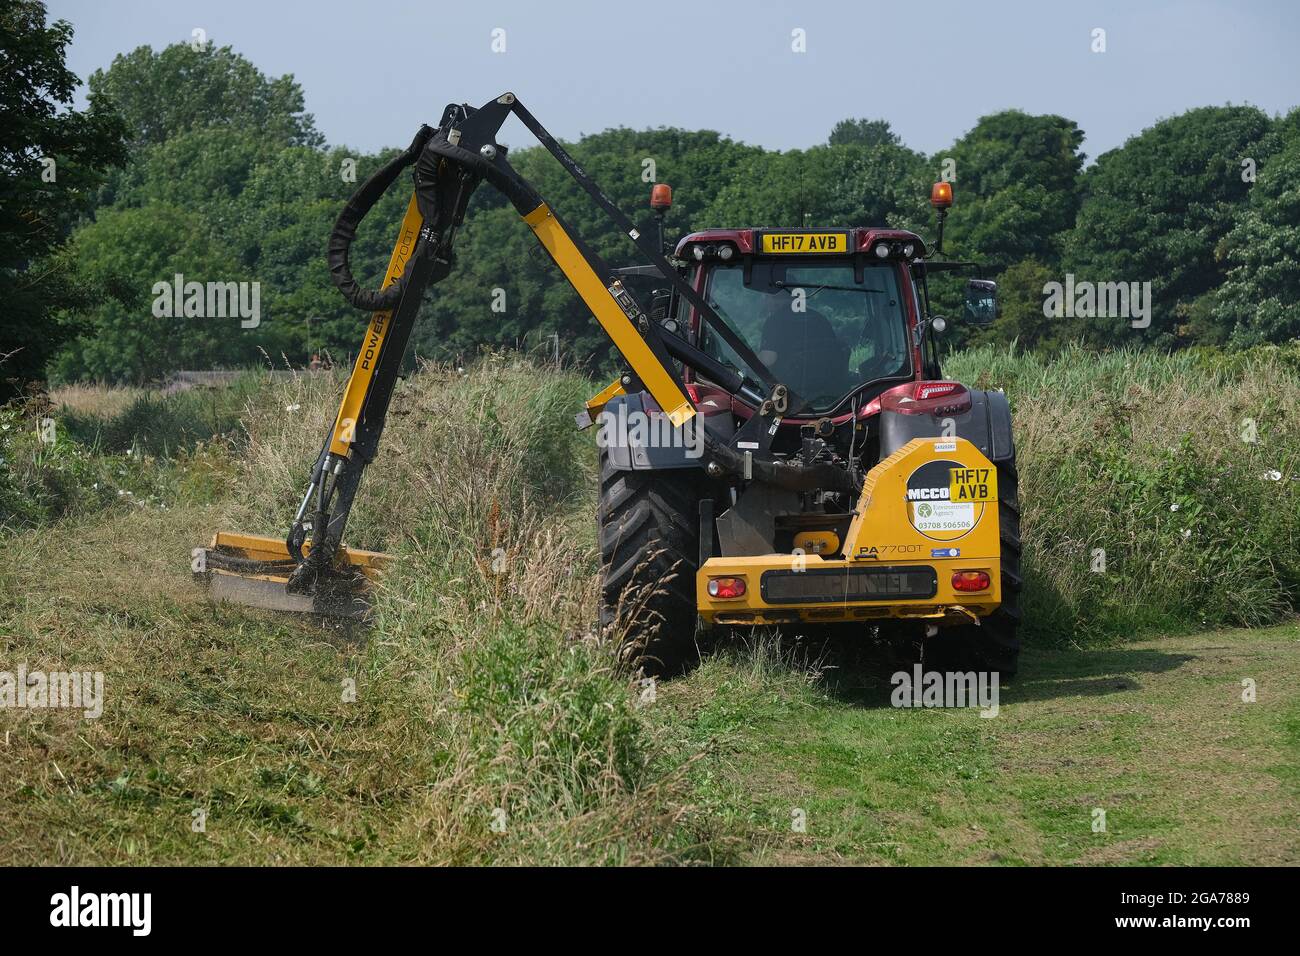 Environmental agency team cutting grass and working on dykes in rural area. Stock Photo